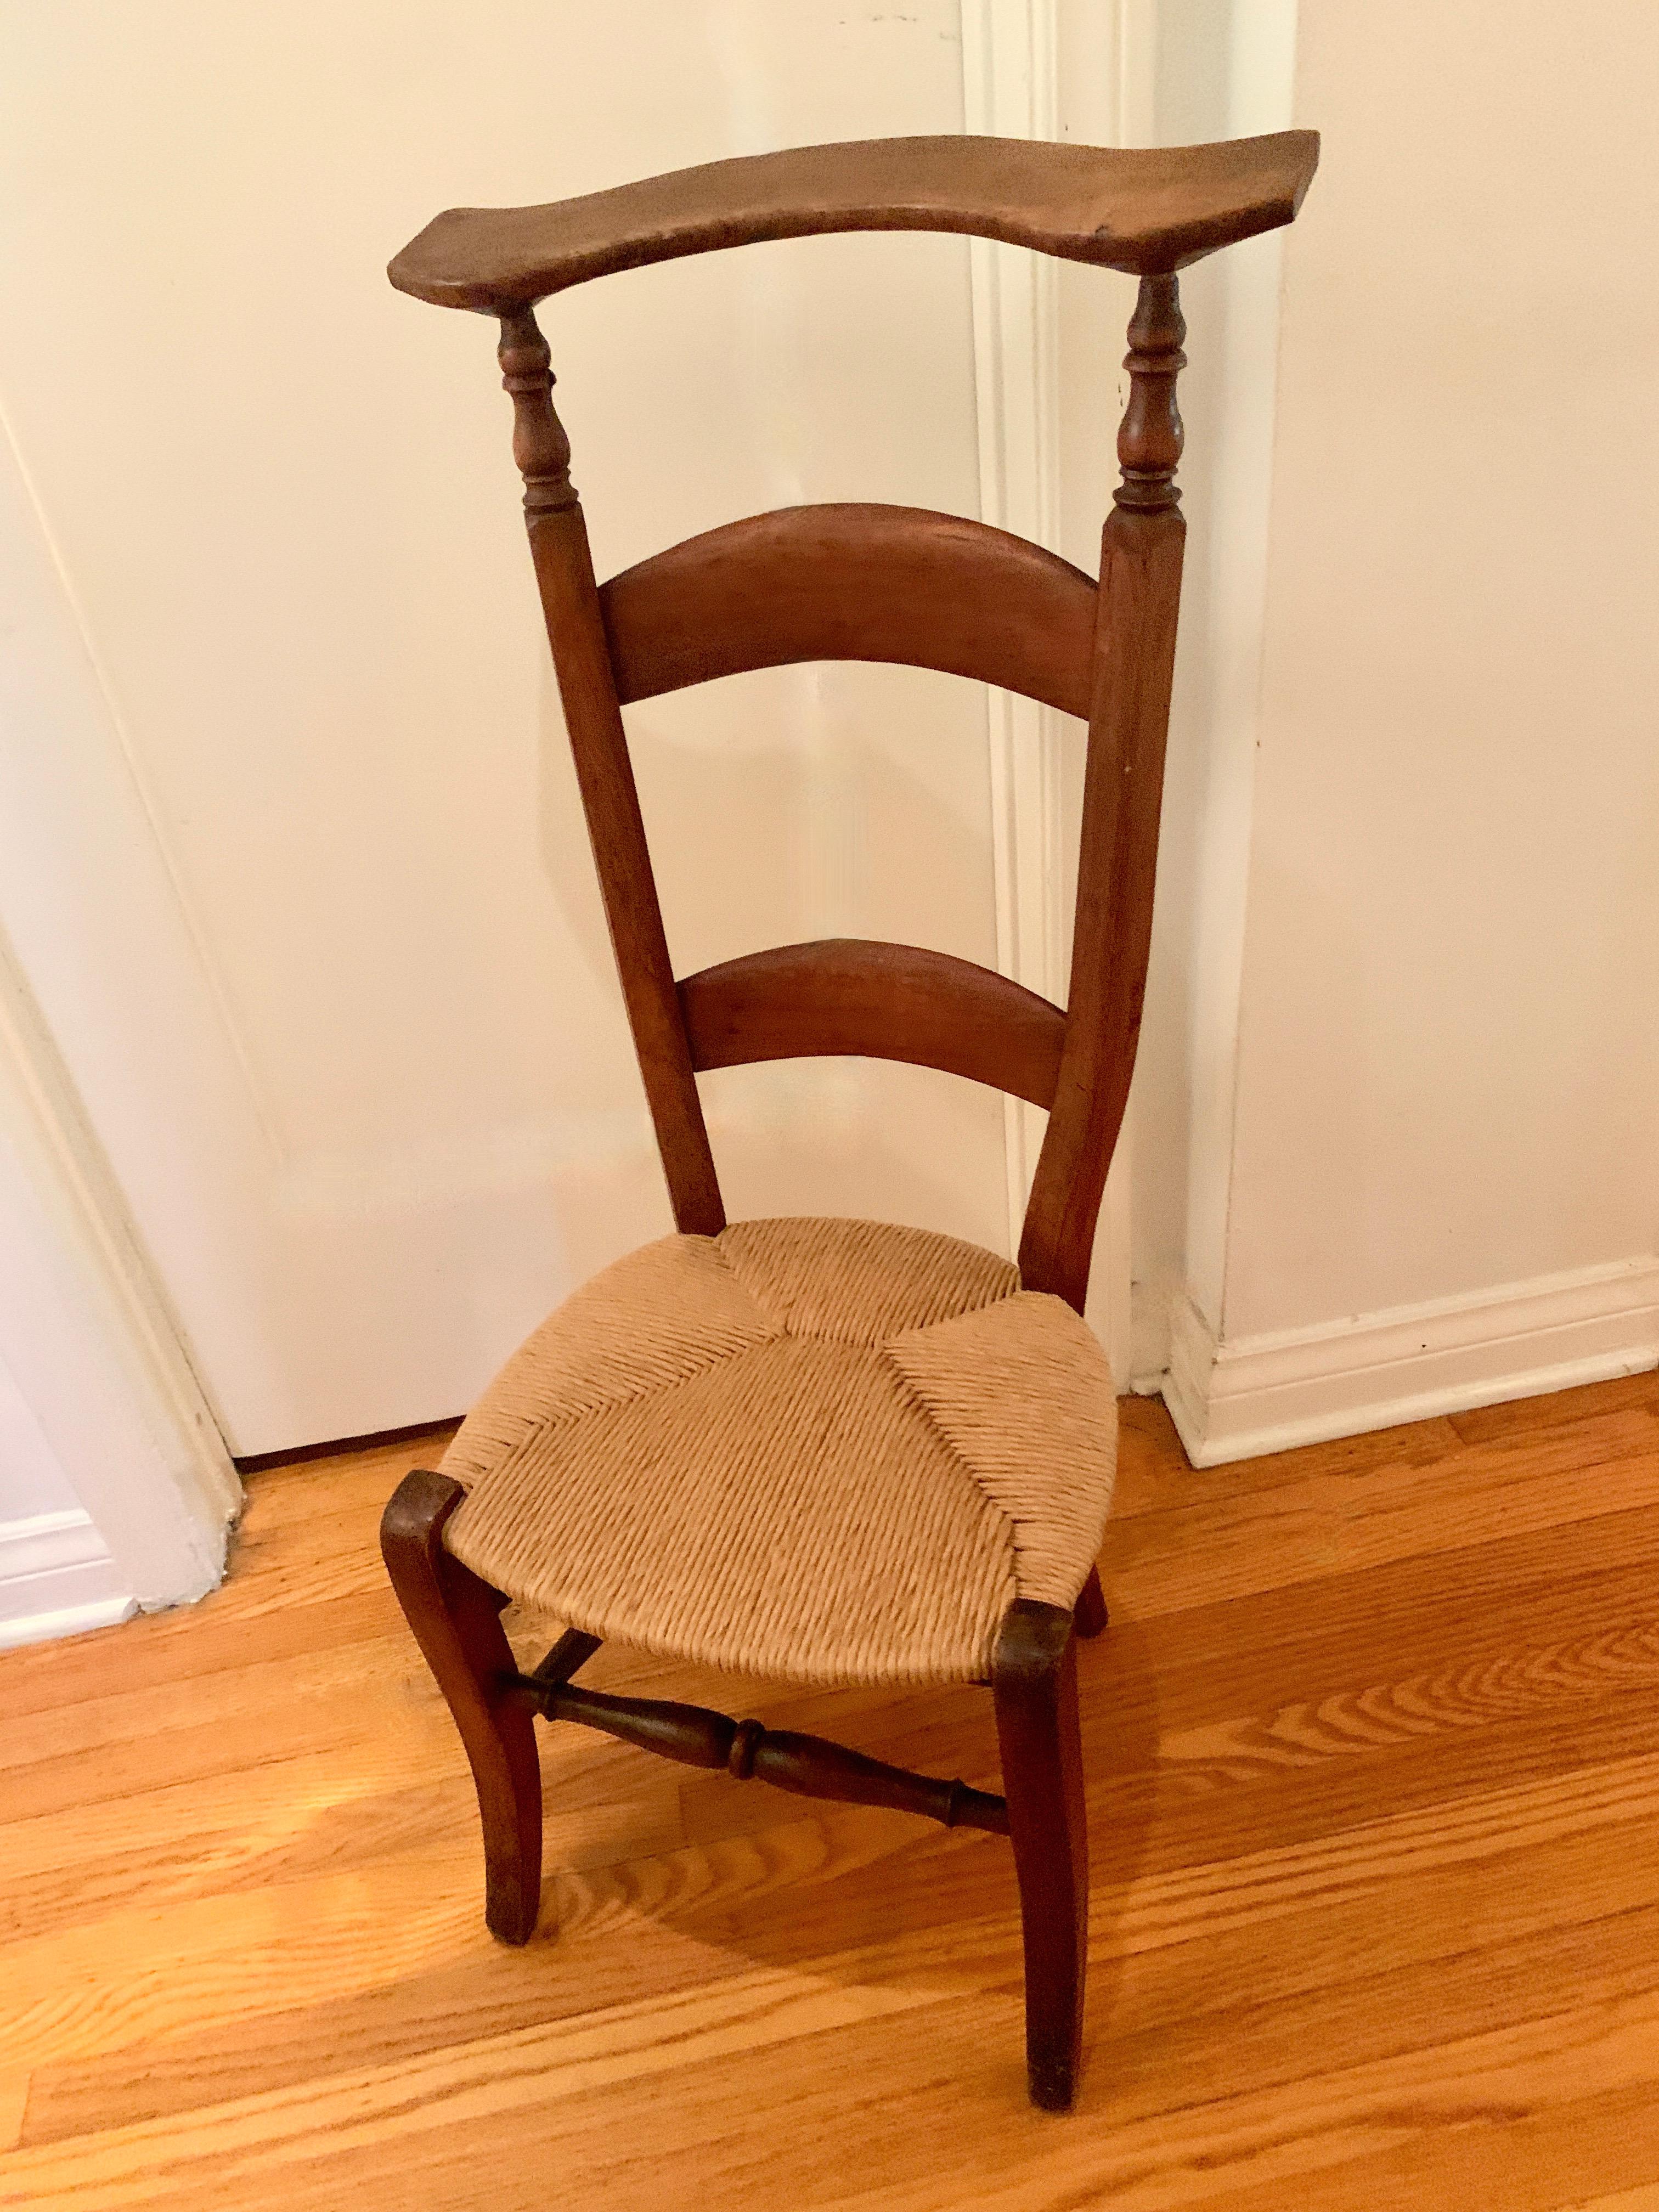 Hand-Woven 19th C. Prie Dieu Chair For Sale